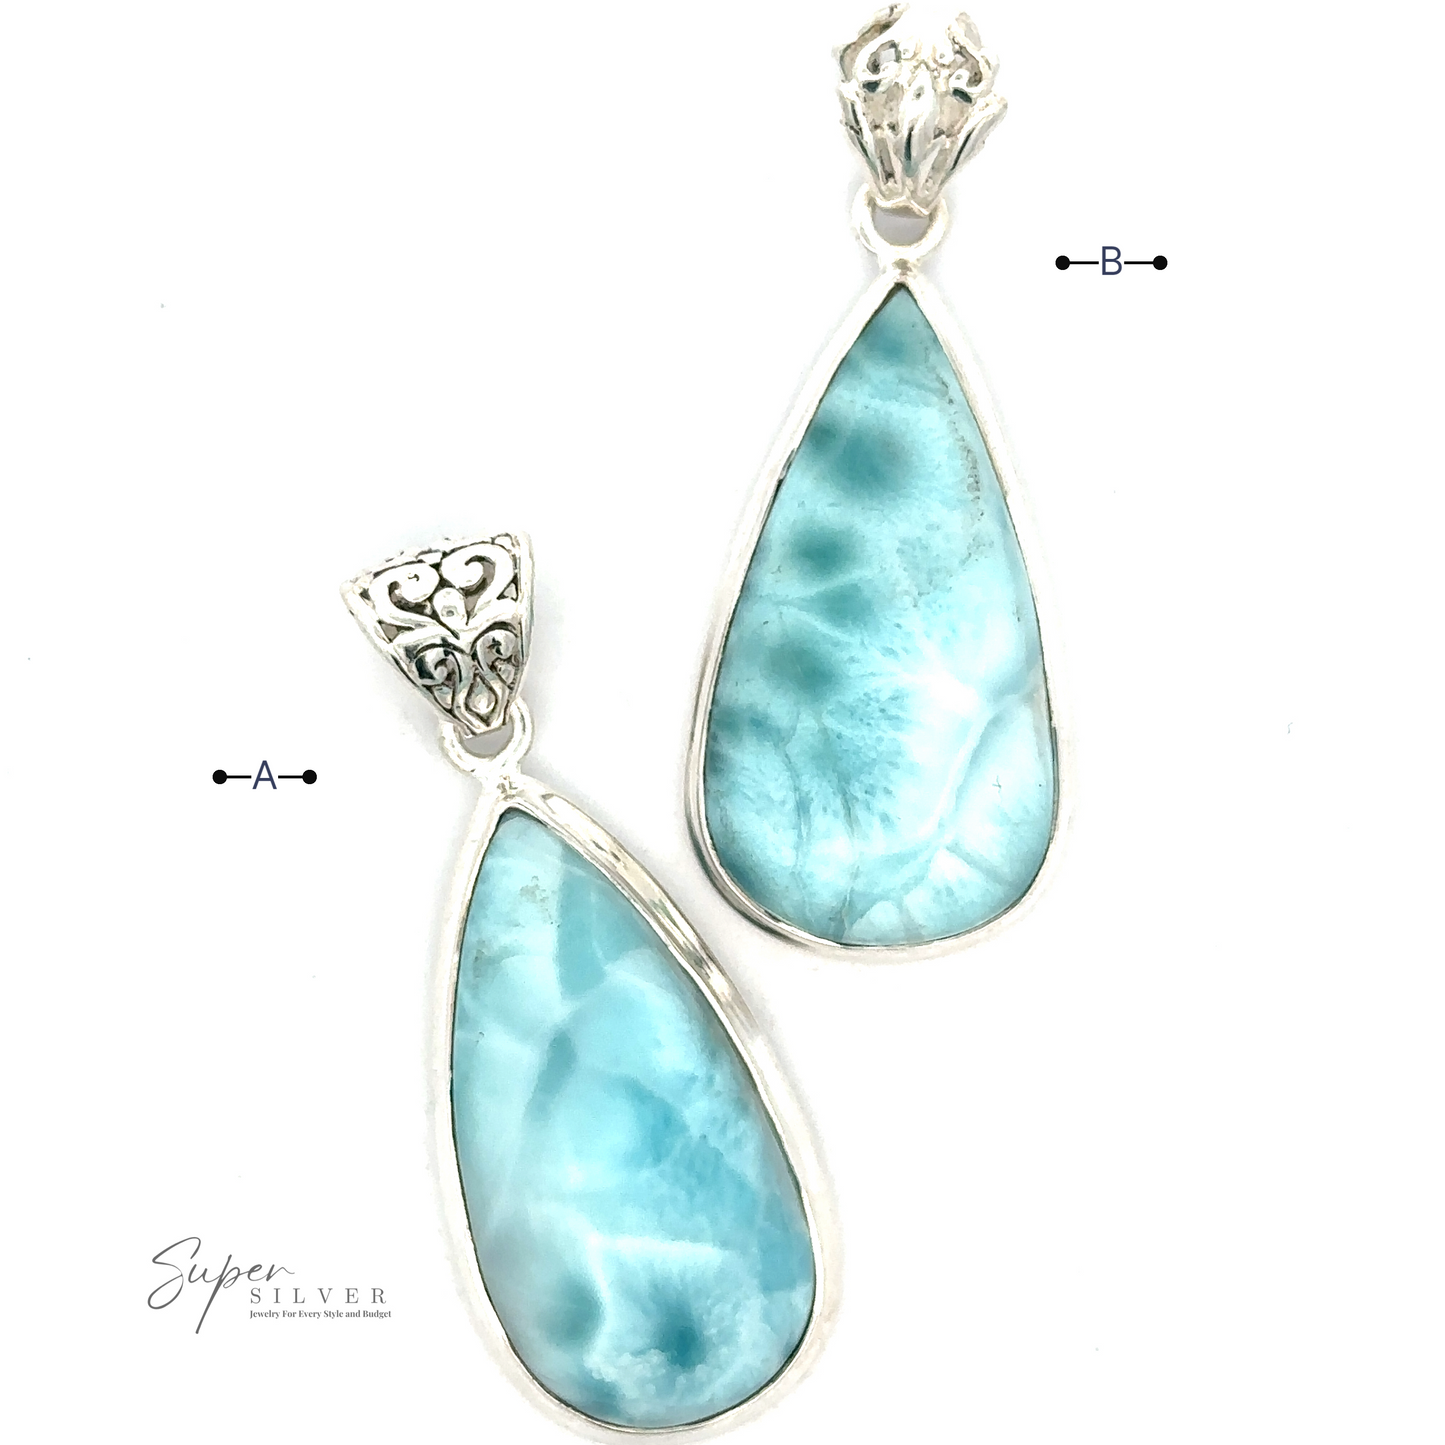 
                  
                    Two teardrop-shaped, silver-framed green stones with intricate silver detailing at the top. The bottom stone is larger than the top one. Made of .925 Sterling Silver, the Teardrop Larimar Pendant has the Super Silver logo at the bottom left corner. Chain not included.
                  
                